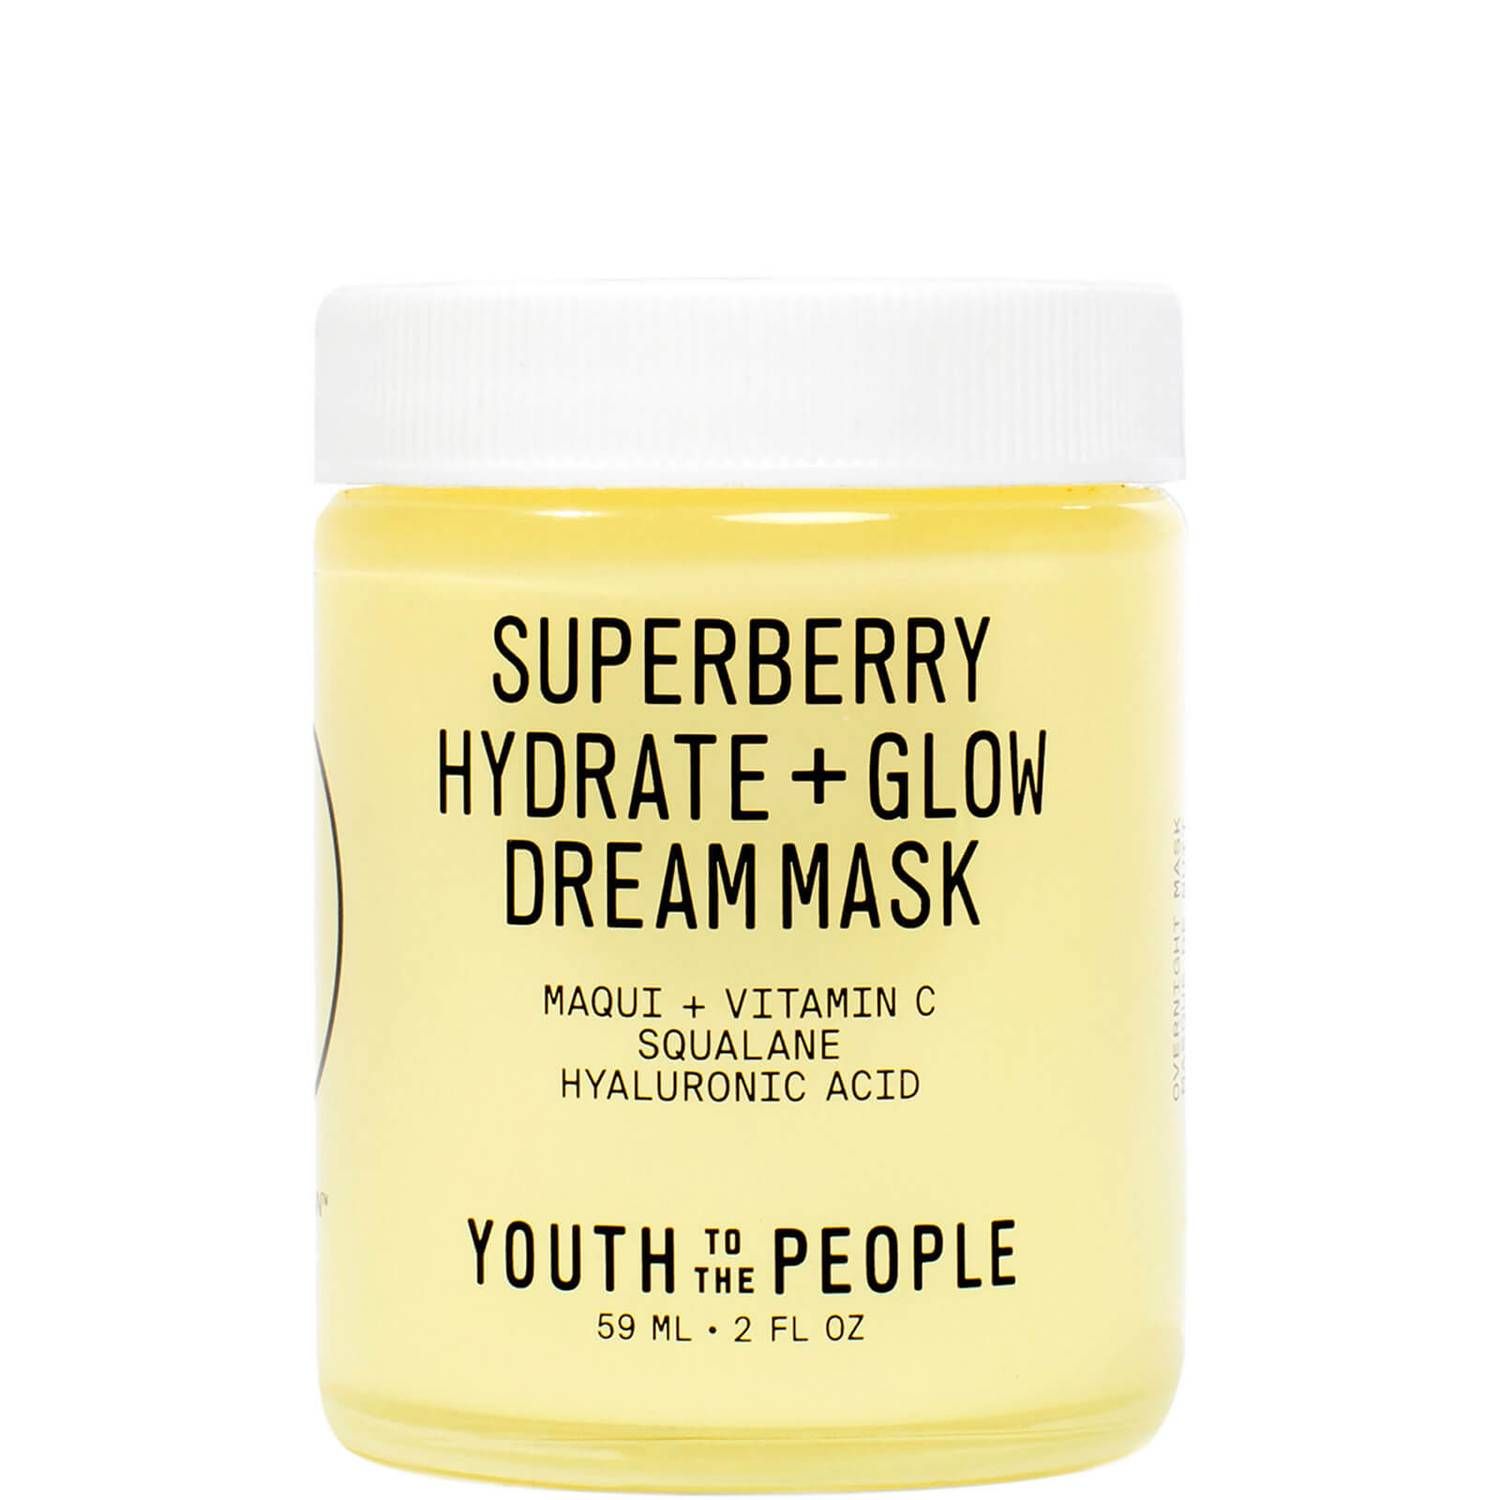 Youth To The People Superberry Hydrate + Glow Dream Mask | Cult Beauty